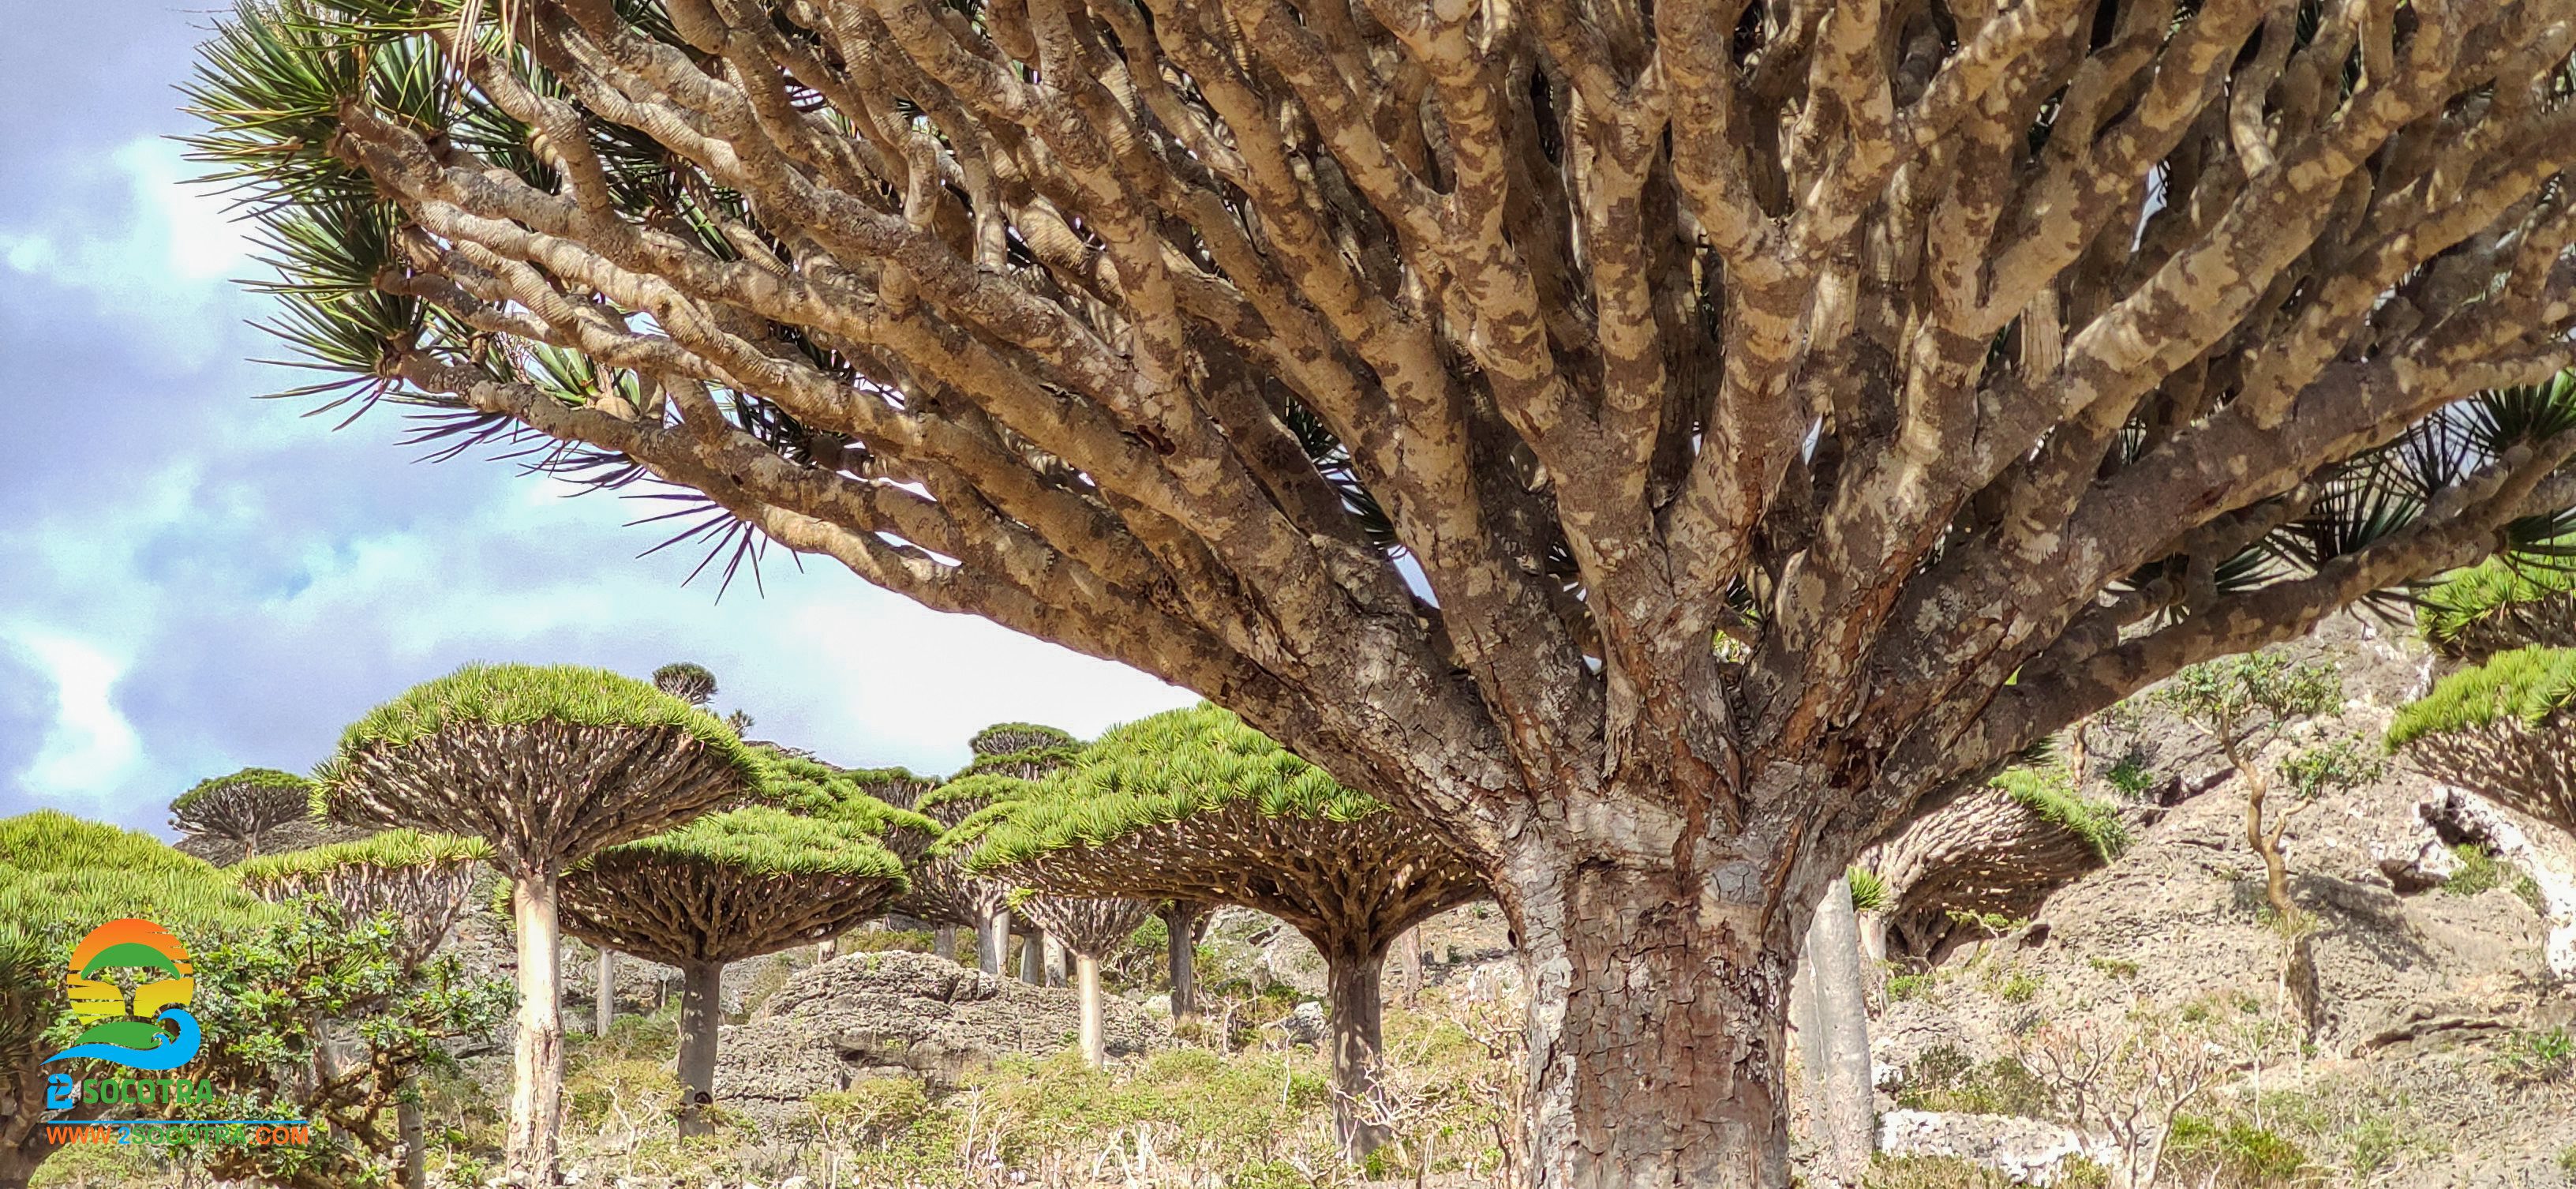 Dragon’s Blood Tree. Socotra forests